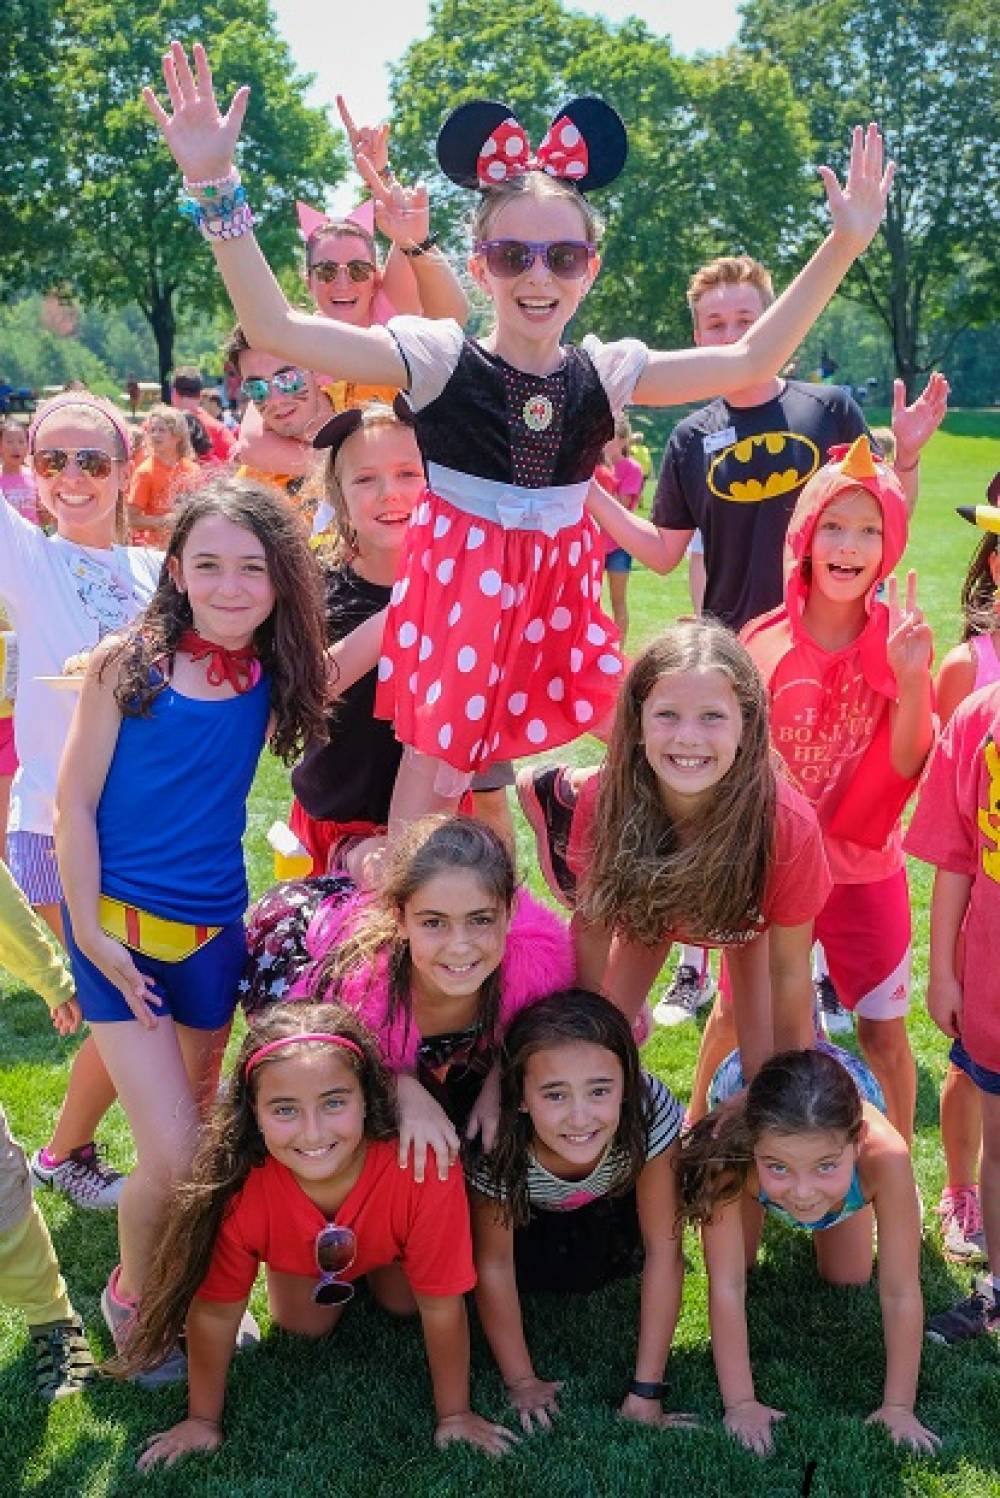 TOP MASSACHUSETTS ART CAMP: Nobles Day Camp is a Top Art Summer Camp located in Dedham Massachusetts offering many fun and enriching Art and other camp programs. 